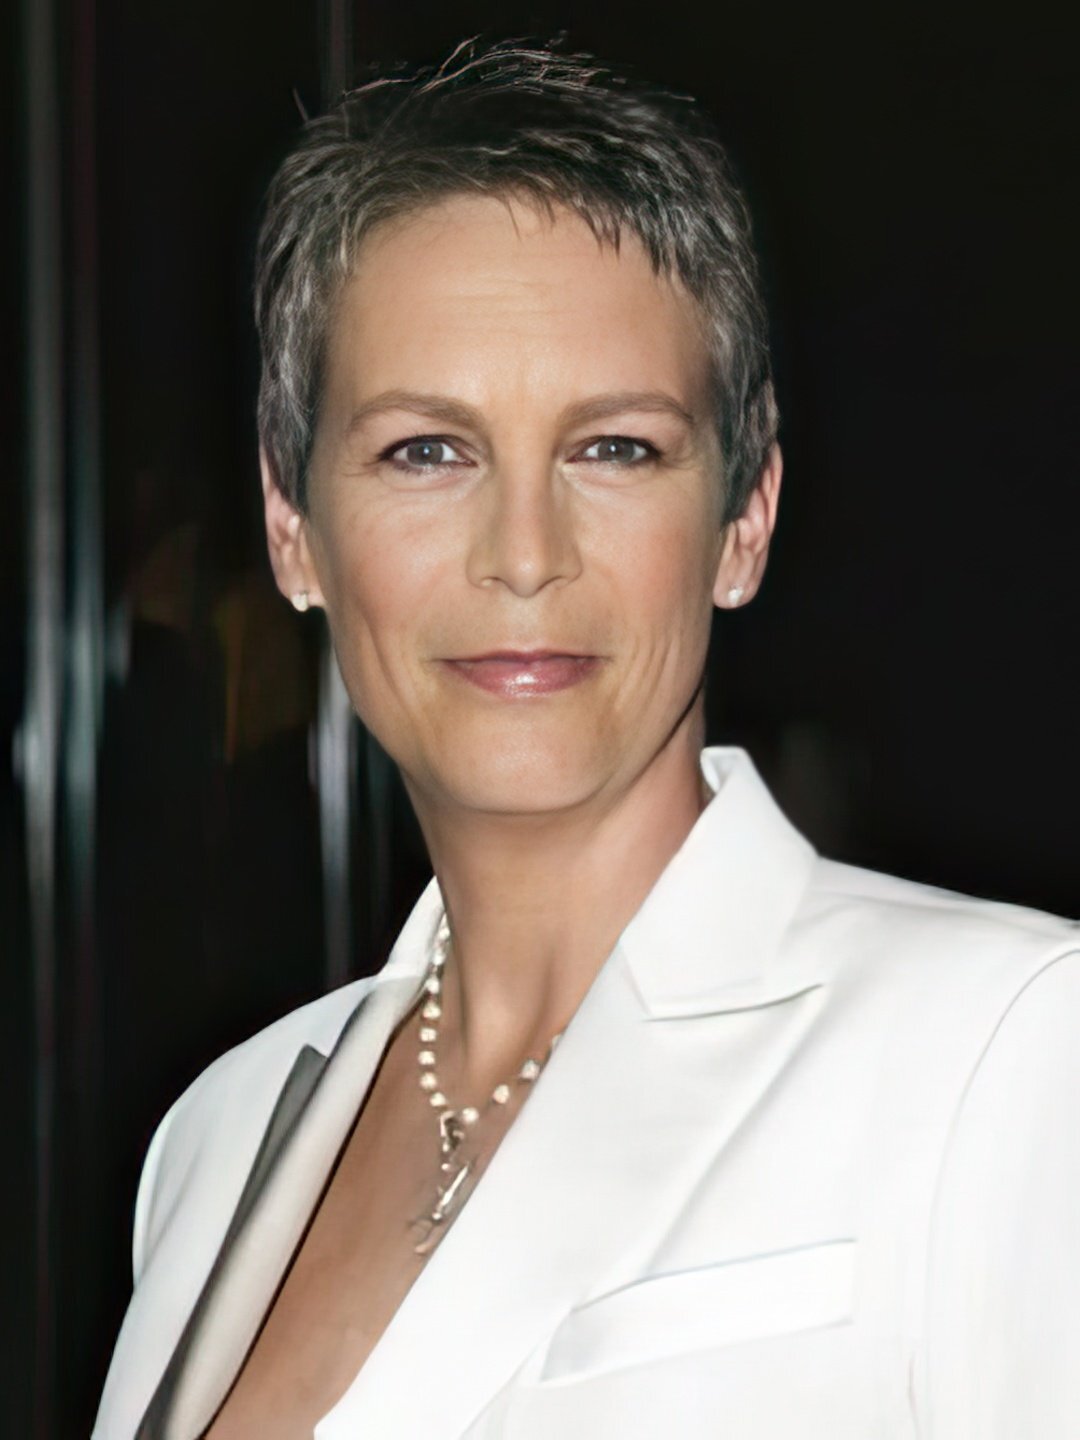 Jamie Lee Curtis young pics